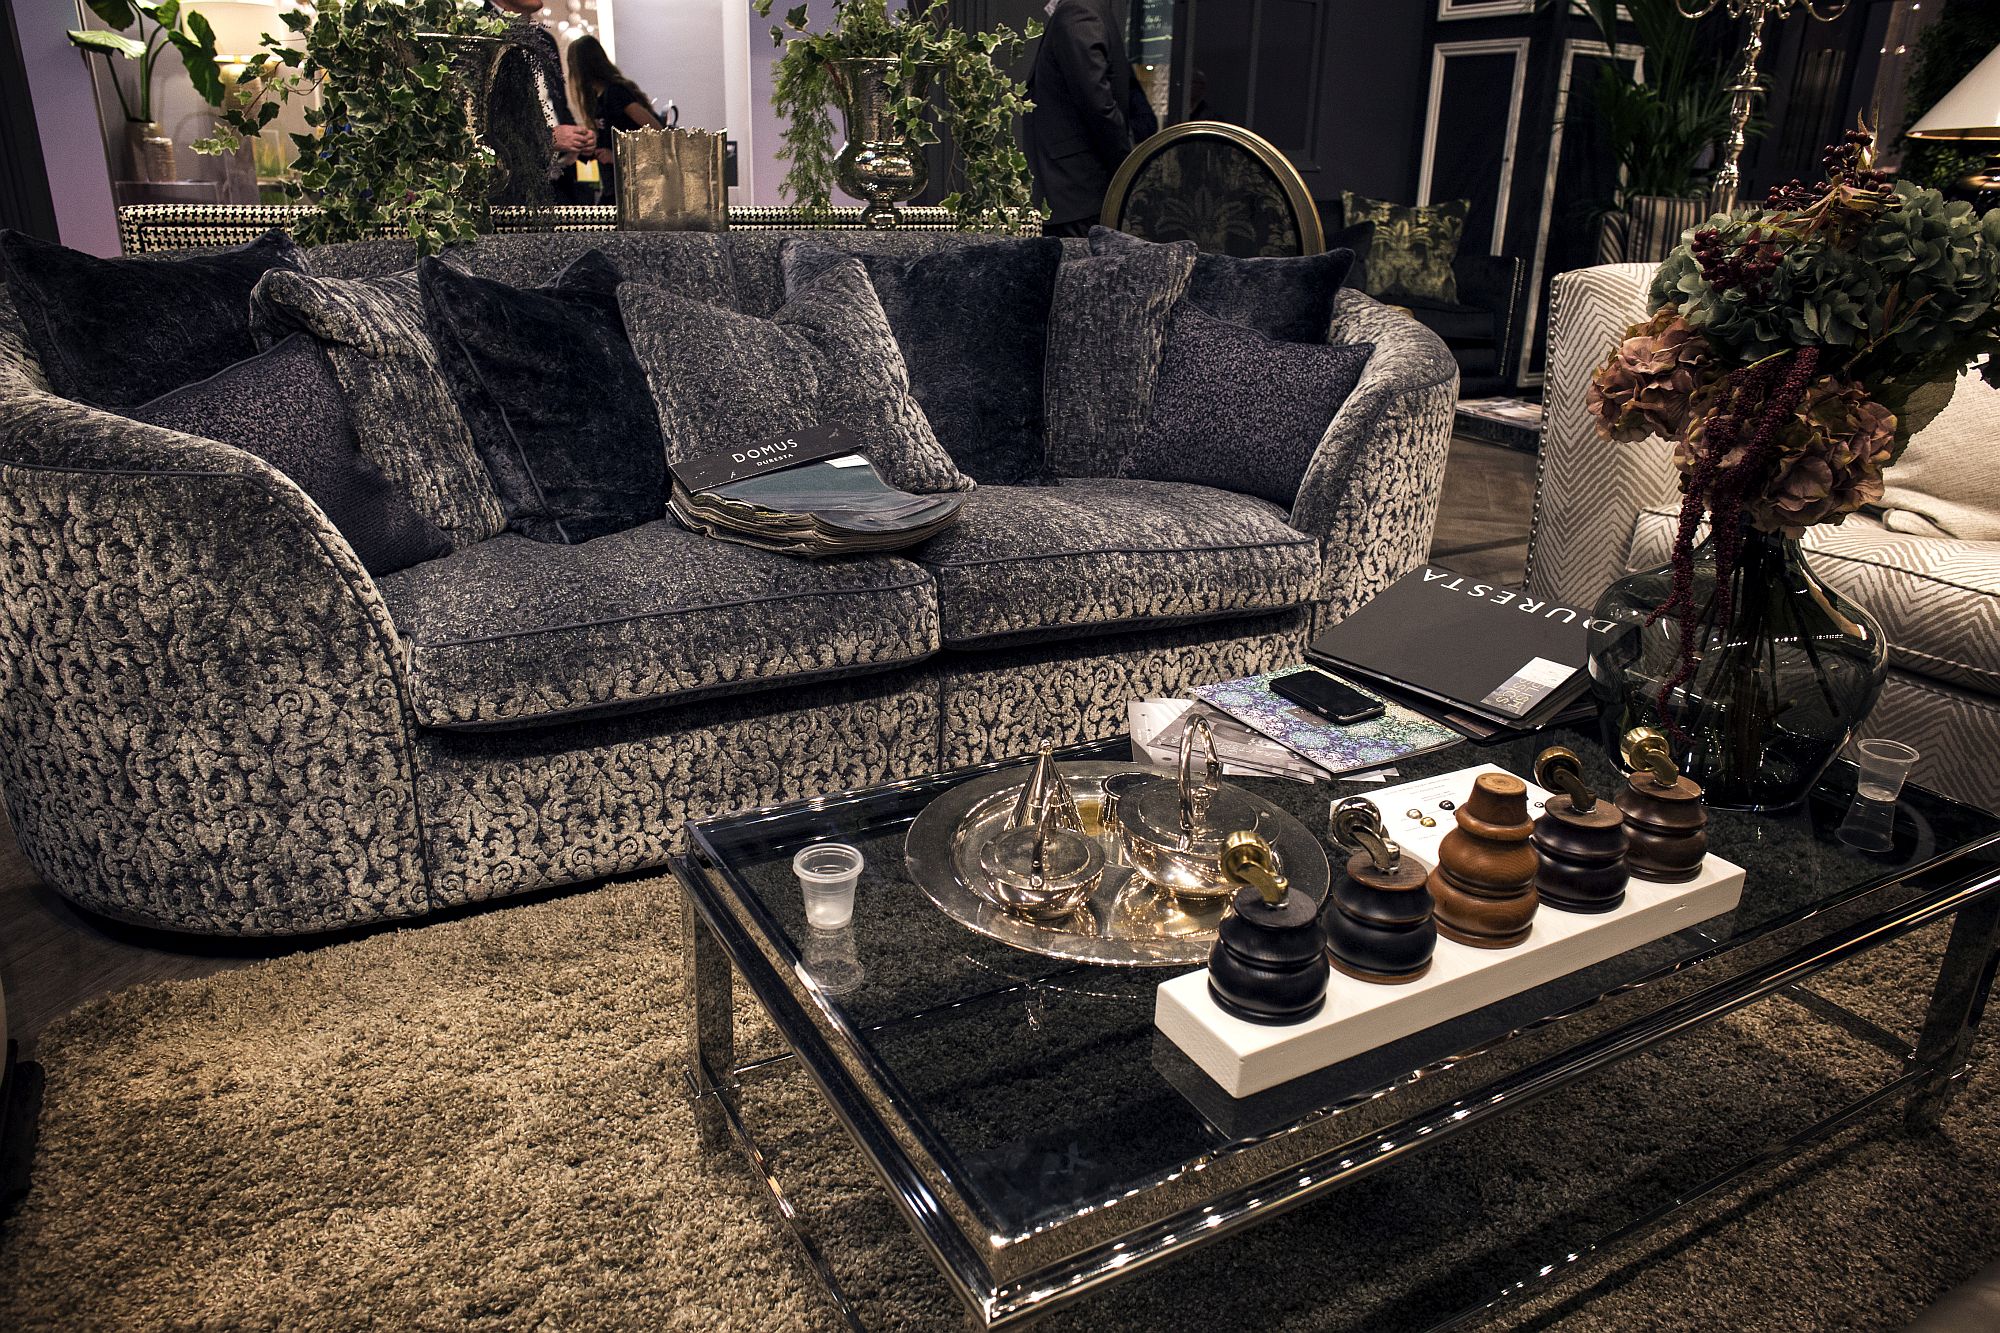 Stylish coffee table with glassy charm and a hint of black elegance